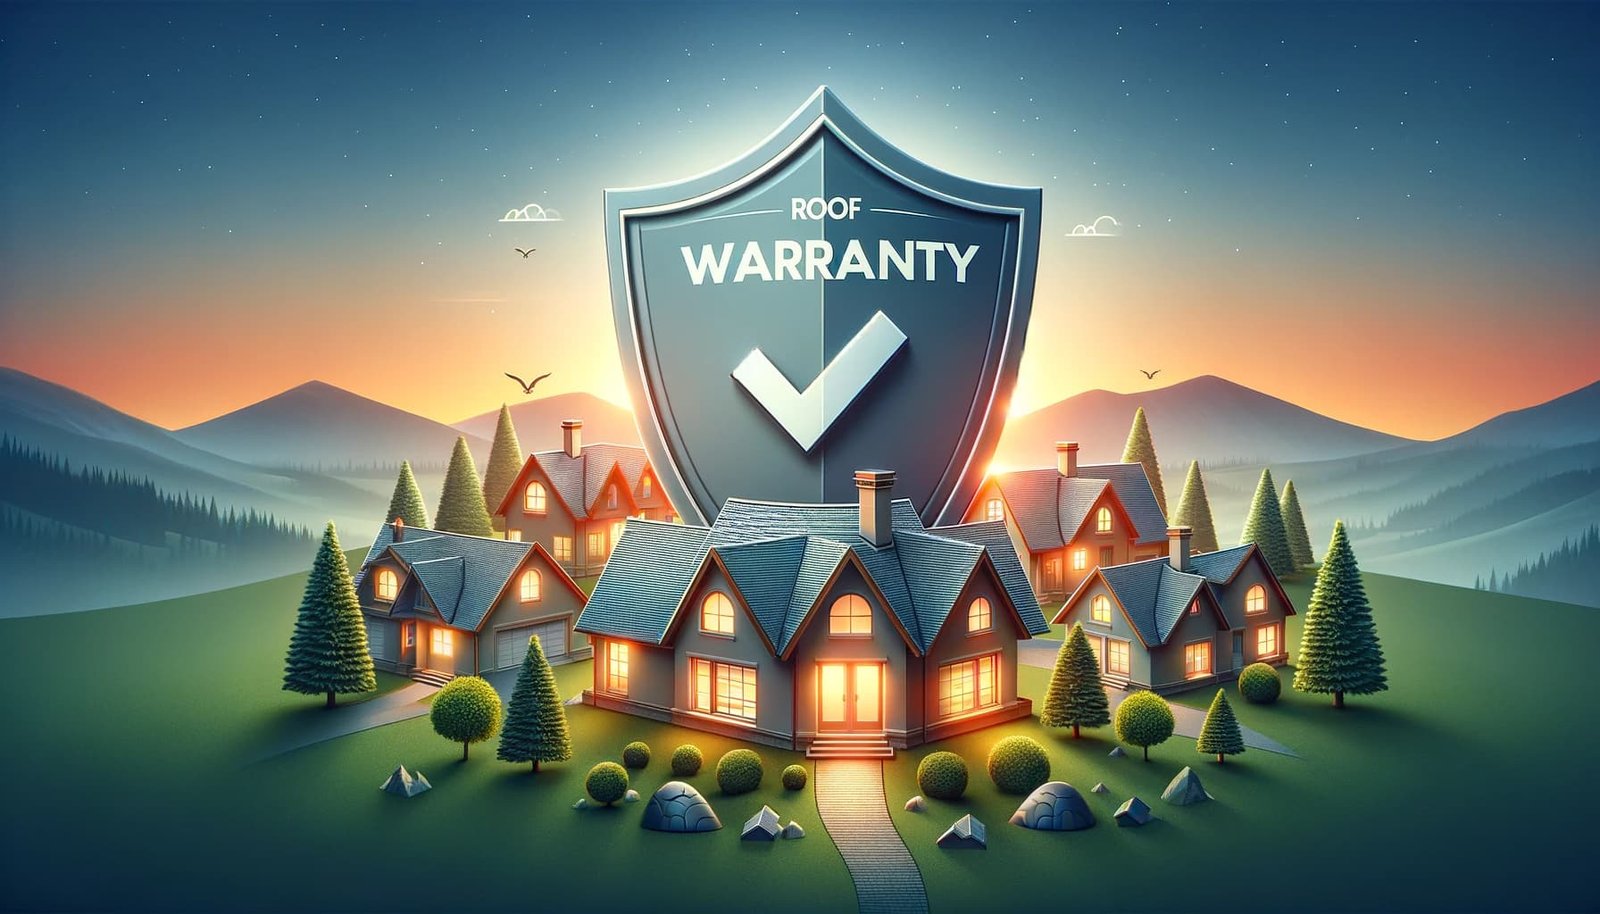 Roof Warranty Image | SNS Roofing